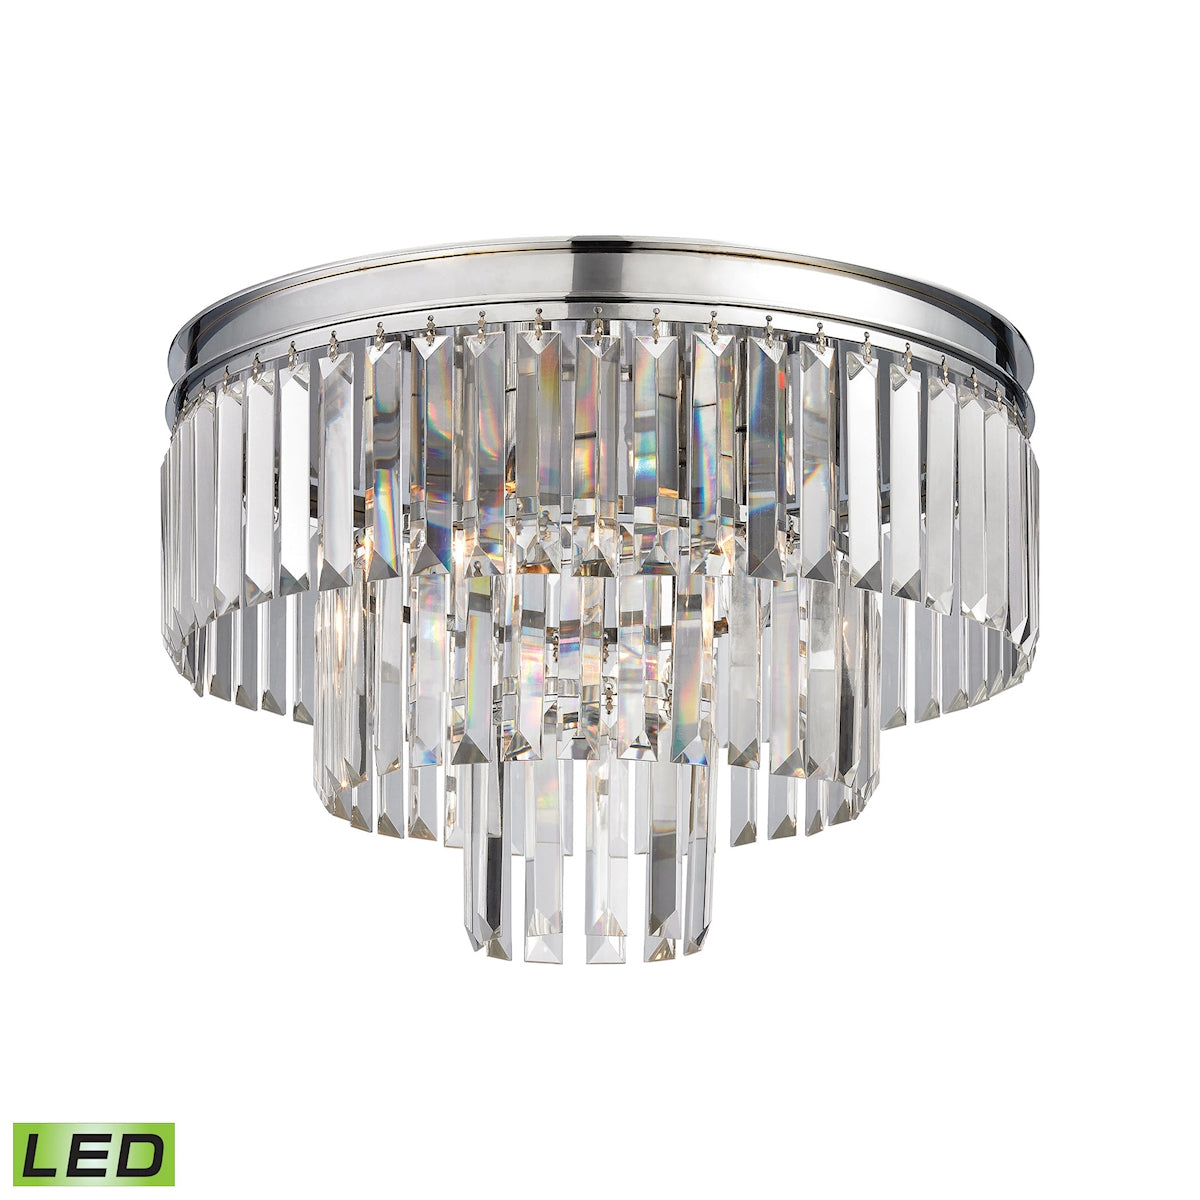 ELK Lighting 15215/3-LED Palacial 3-Light Semi Flush in Polished Chrome with Clear Crystal - Includes LED Bulbs